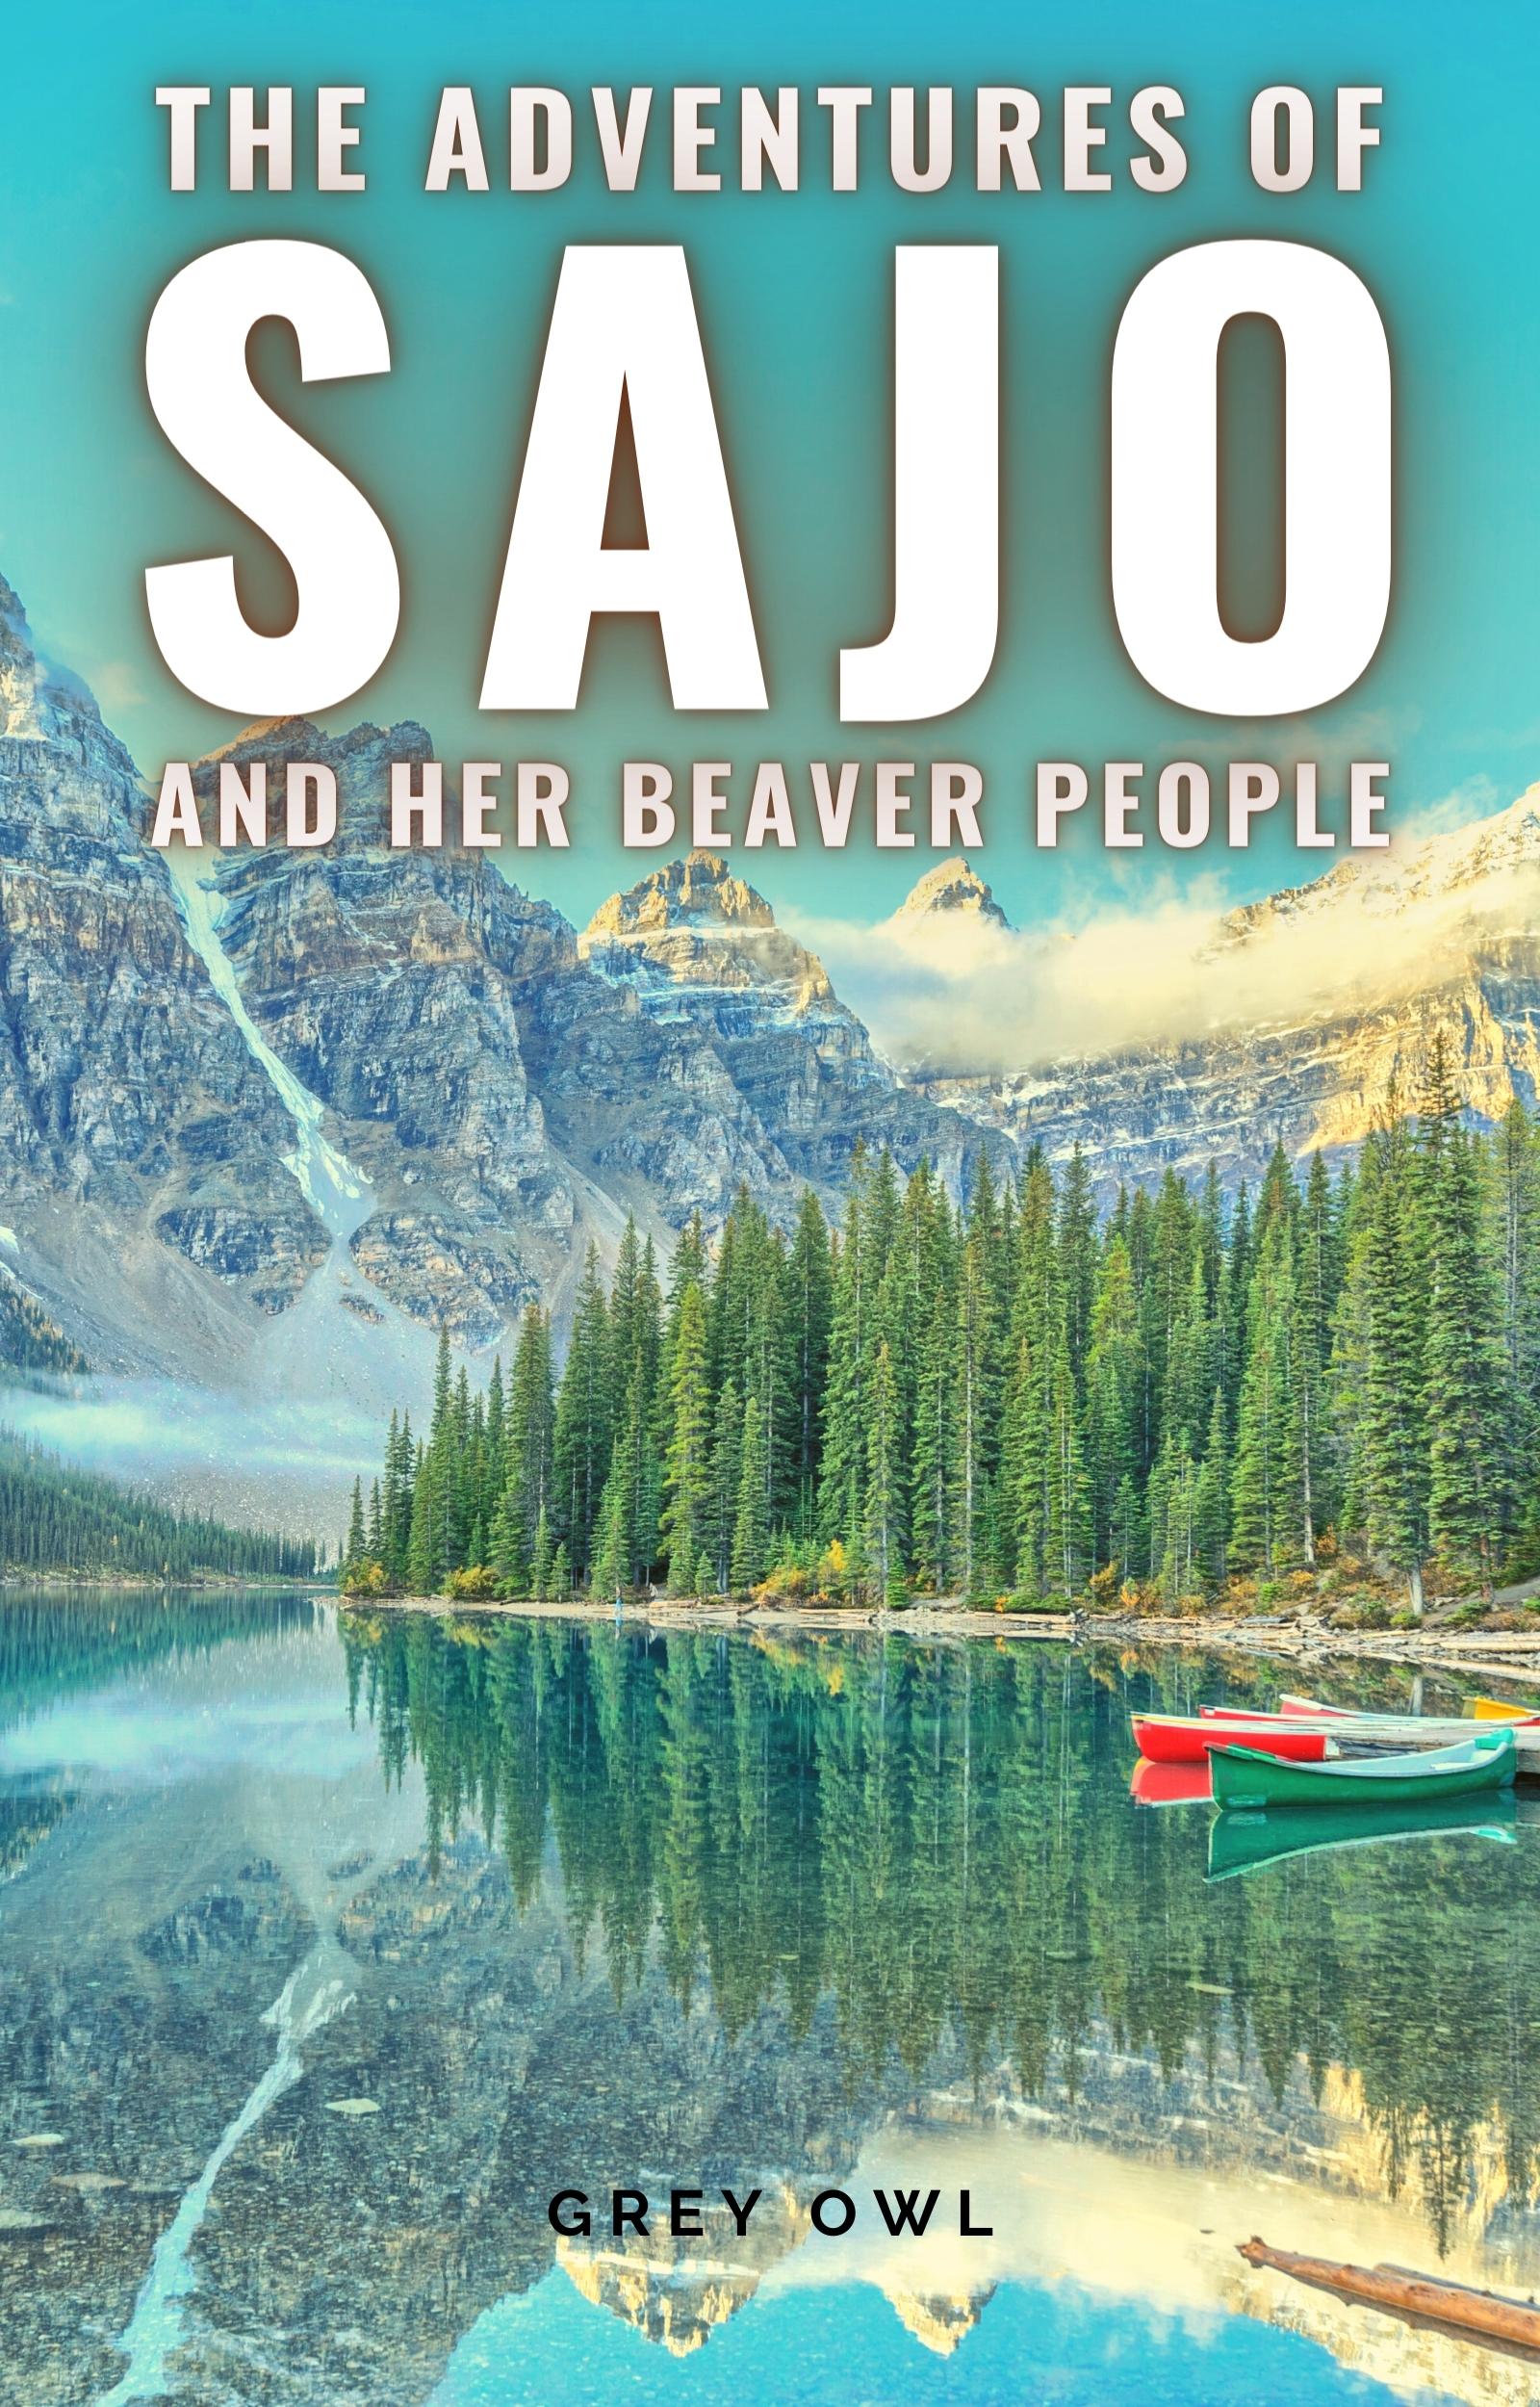  The adventures of Sajo and her beaver people 